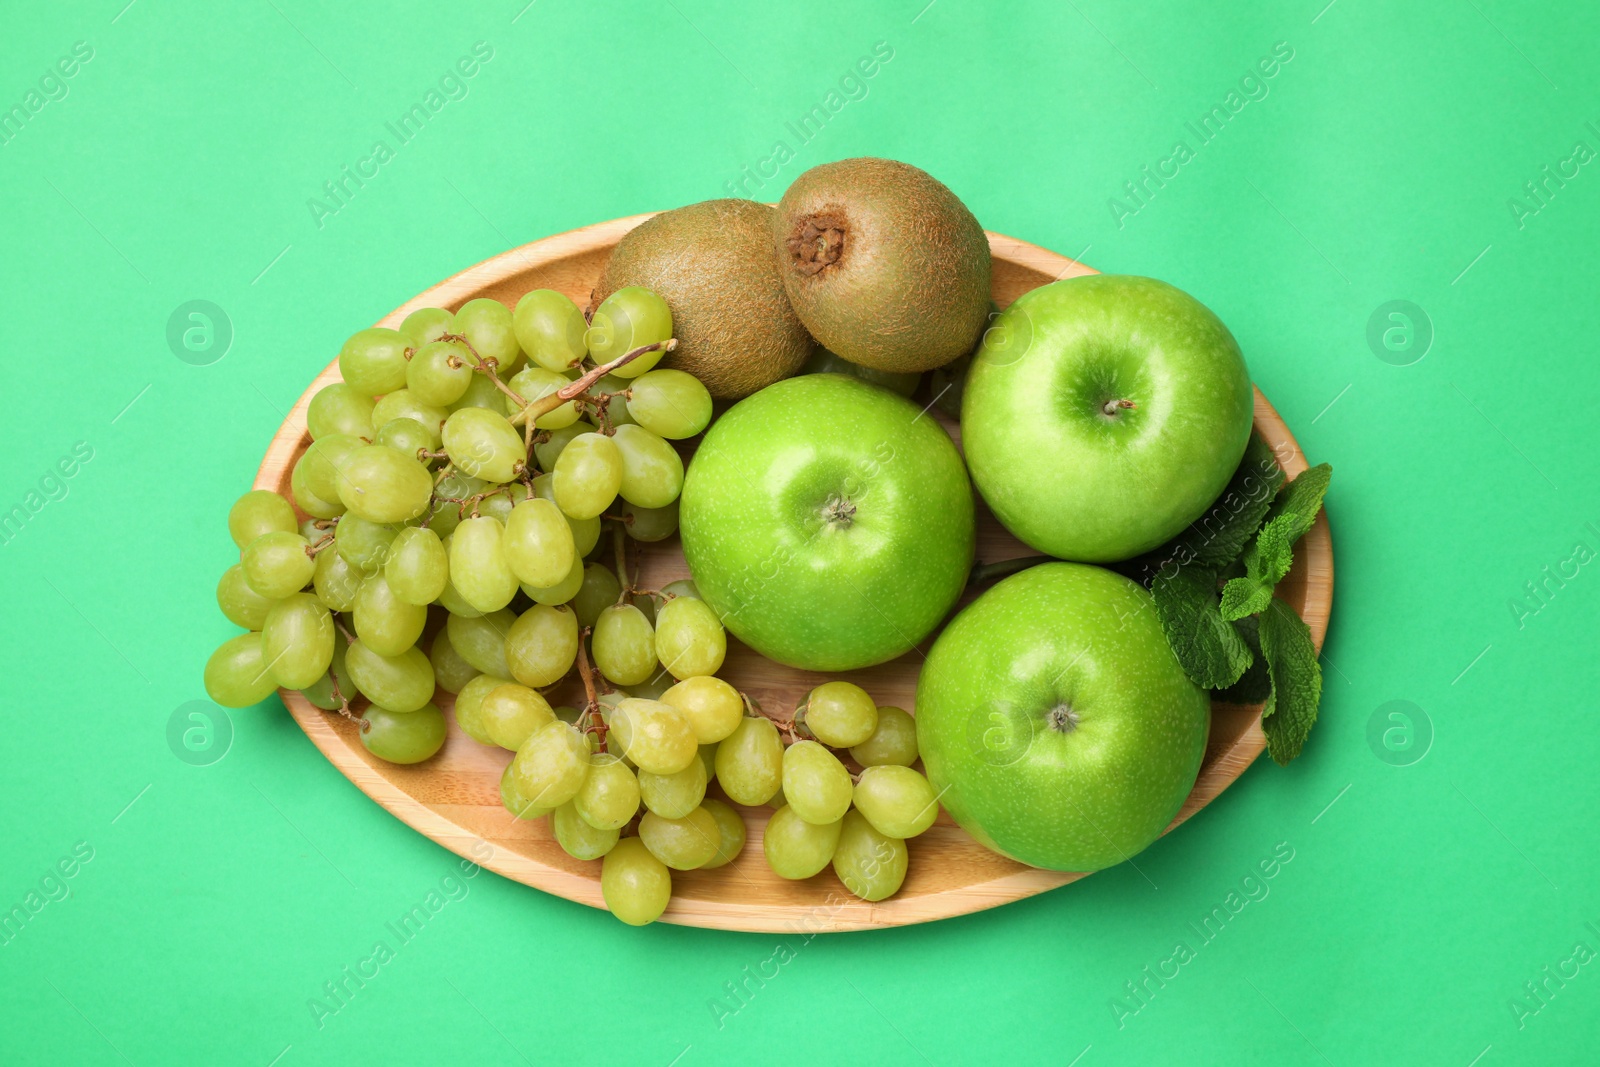 Photo of Fresh ripe apples, kiwis, grape and mint on green background, top view